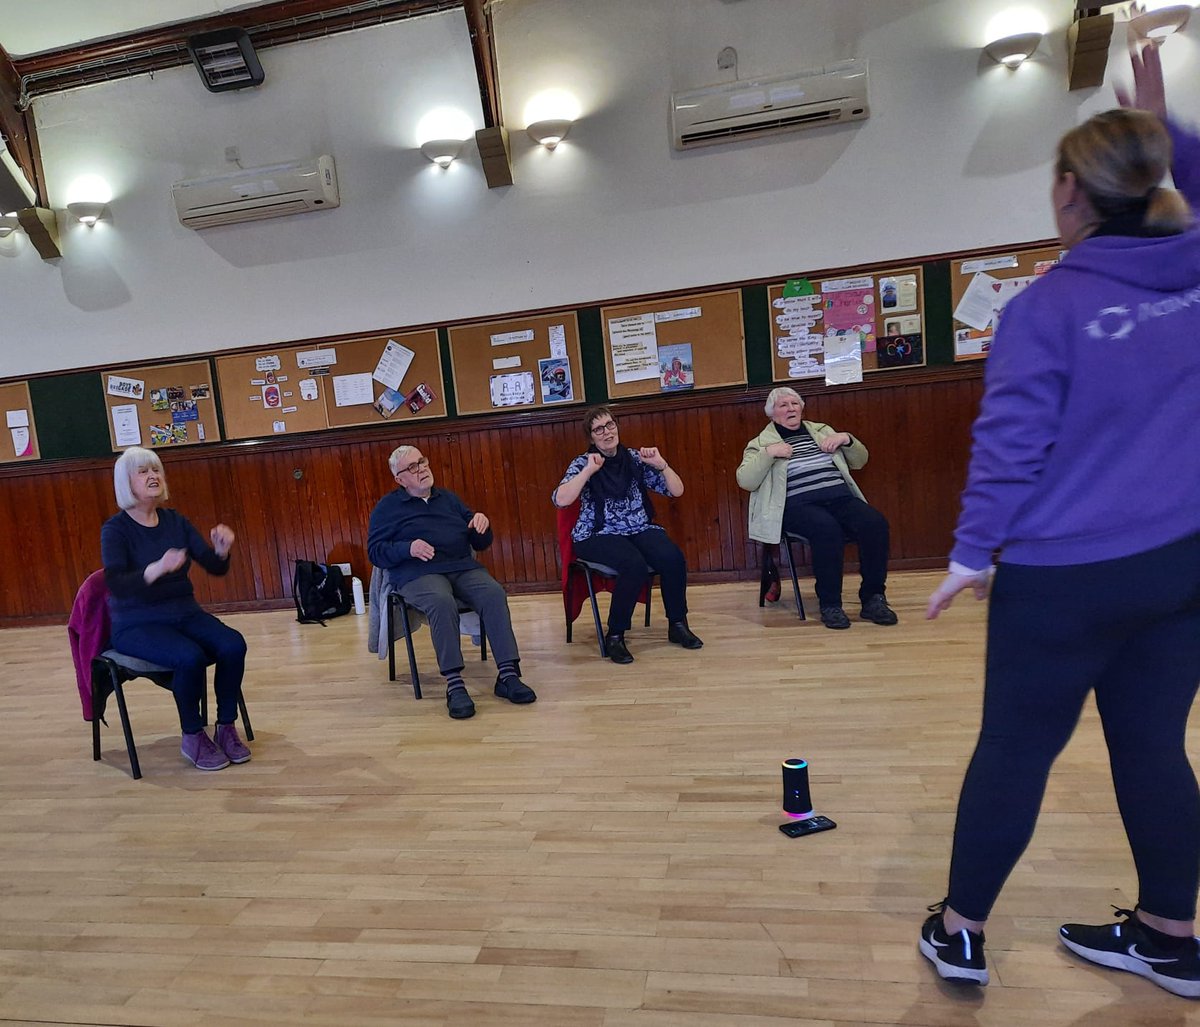 Great chair exercise session at my monthly visit to Tea's Company in Bridge of Allan #olderadultfitness #funmovementtomusic @activestirling1 #BridgeOfAllan